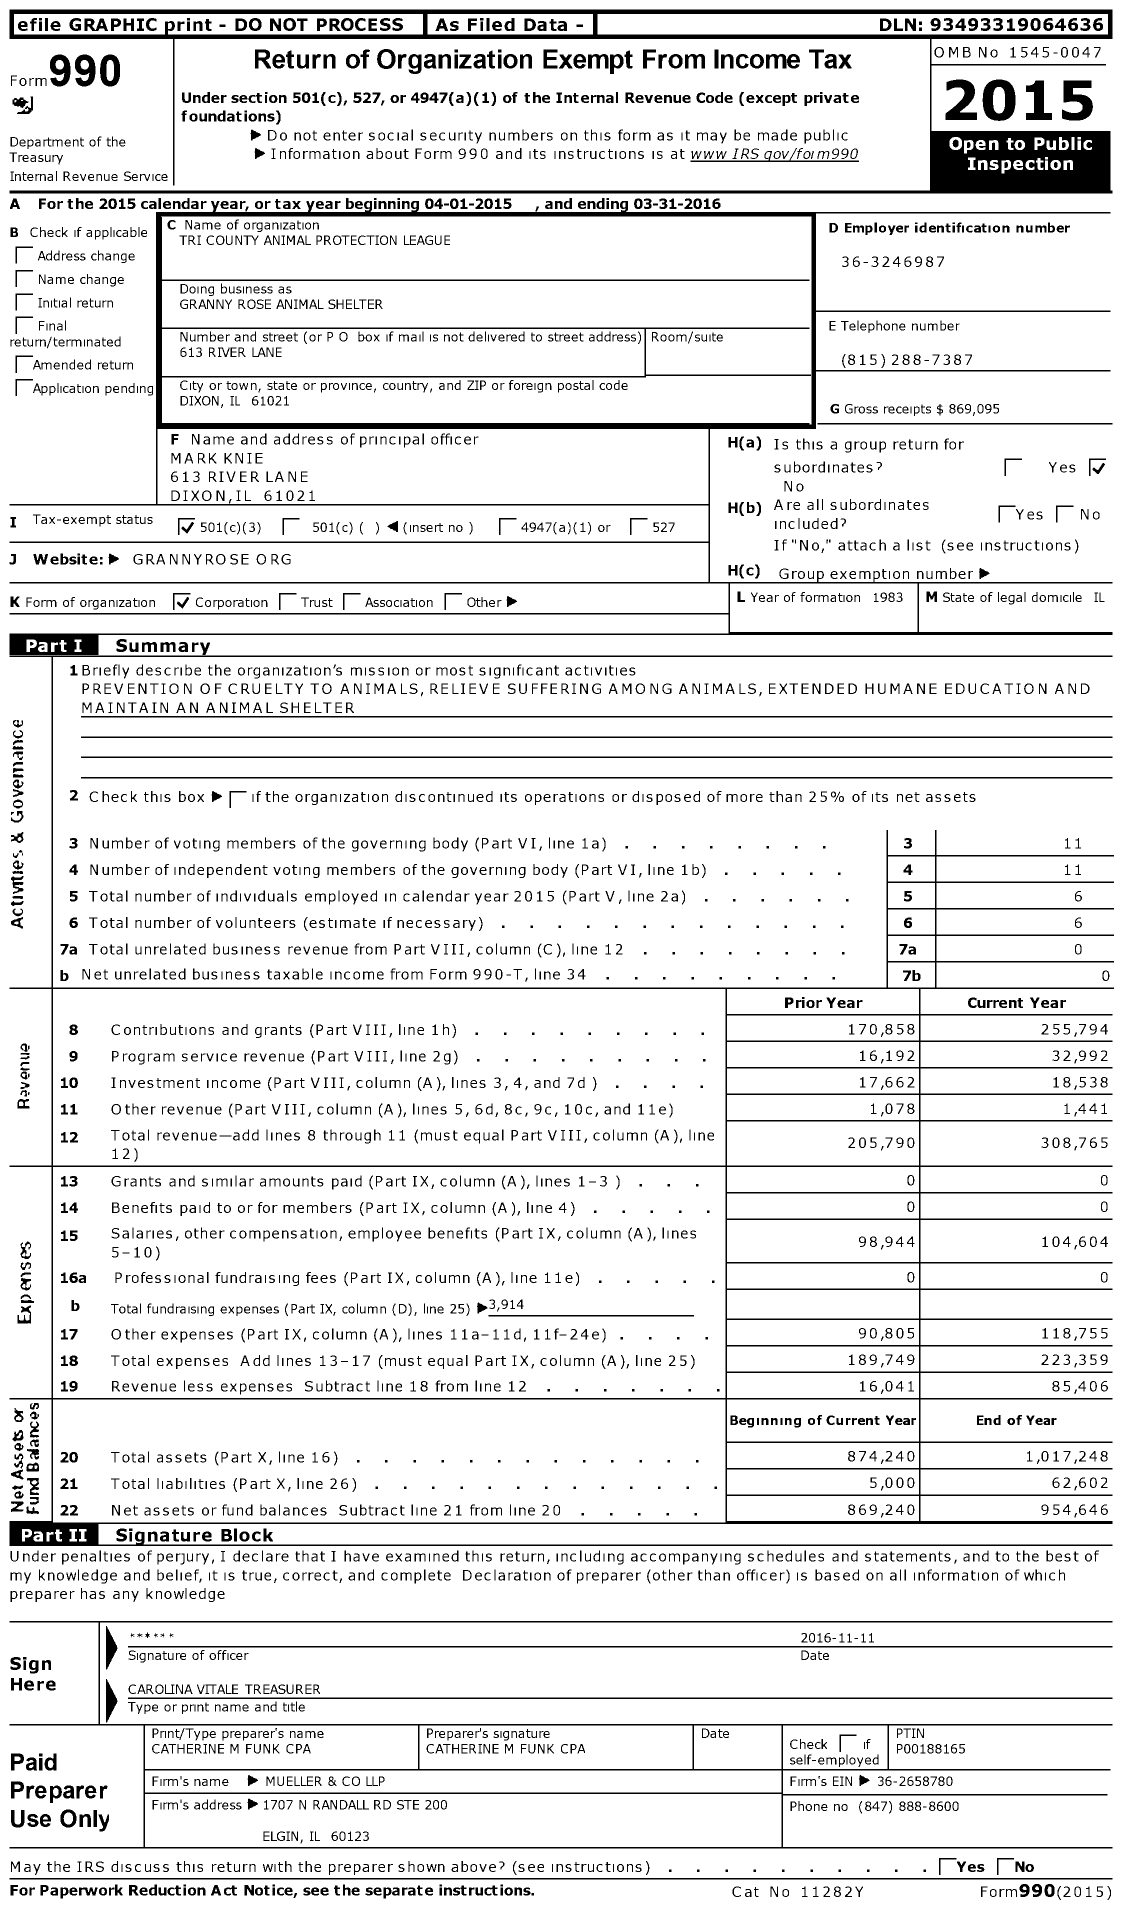 Image of first page of 2015 Form 990 for Granny Rose Animal Shelter